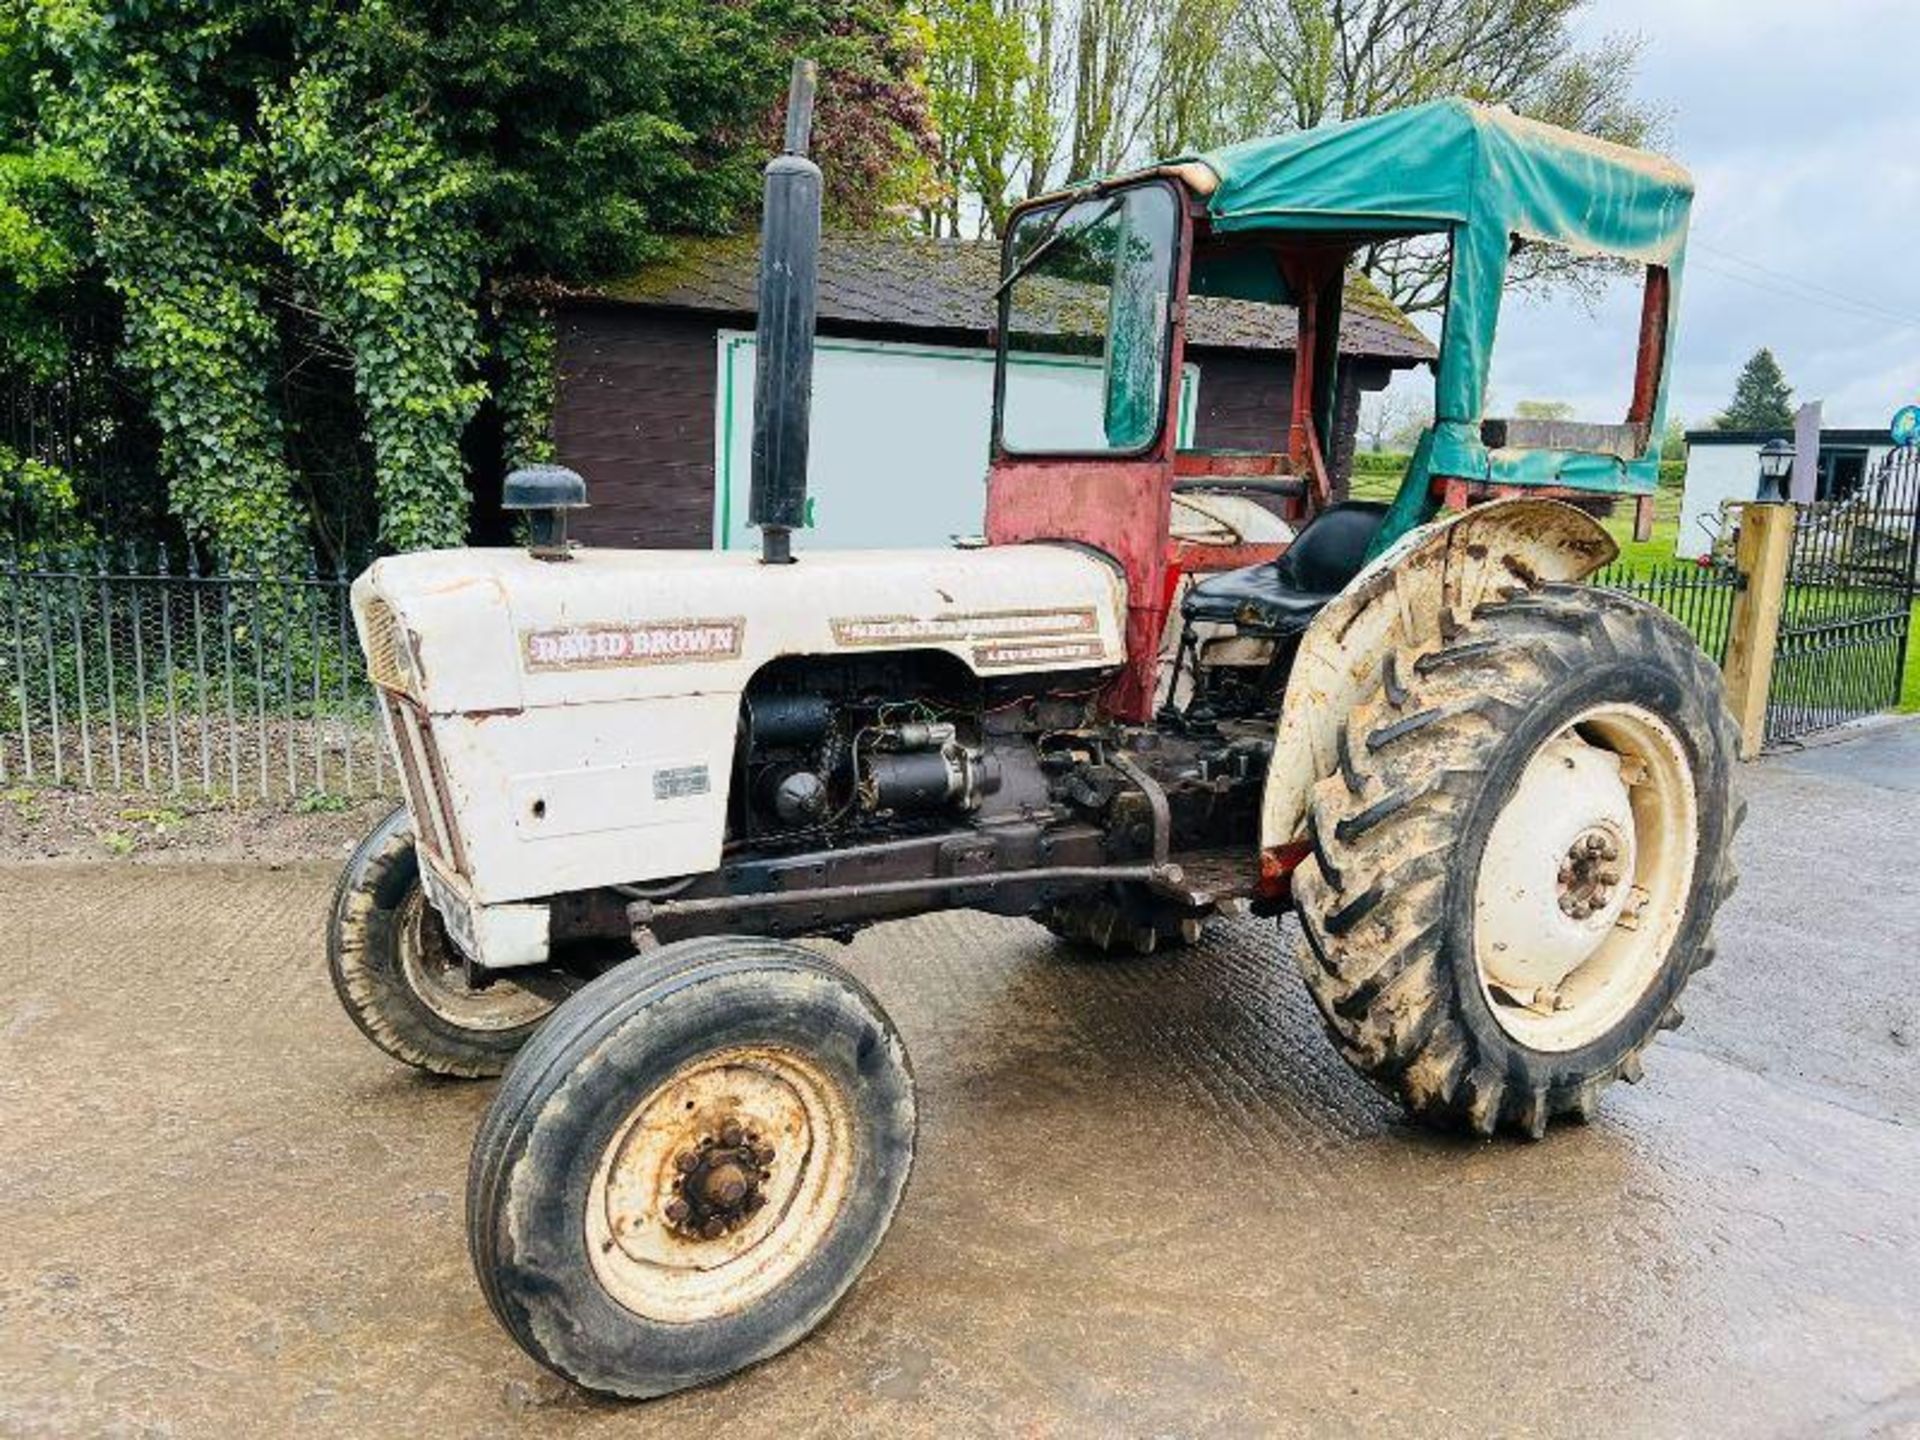 DAVID BROWN 780 TRACTOR *ONE OWNER FROM NEW* C/W ORIGINAL HANDBOOK FROM NEW - Image 10 of 13